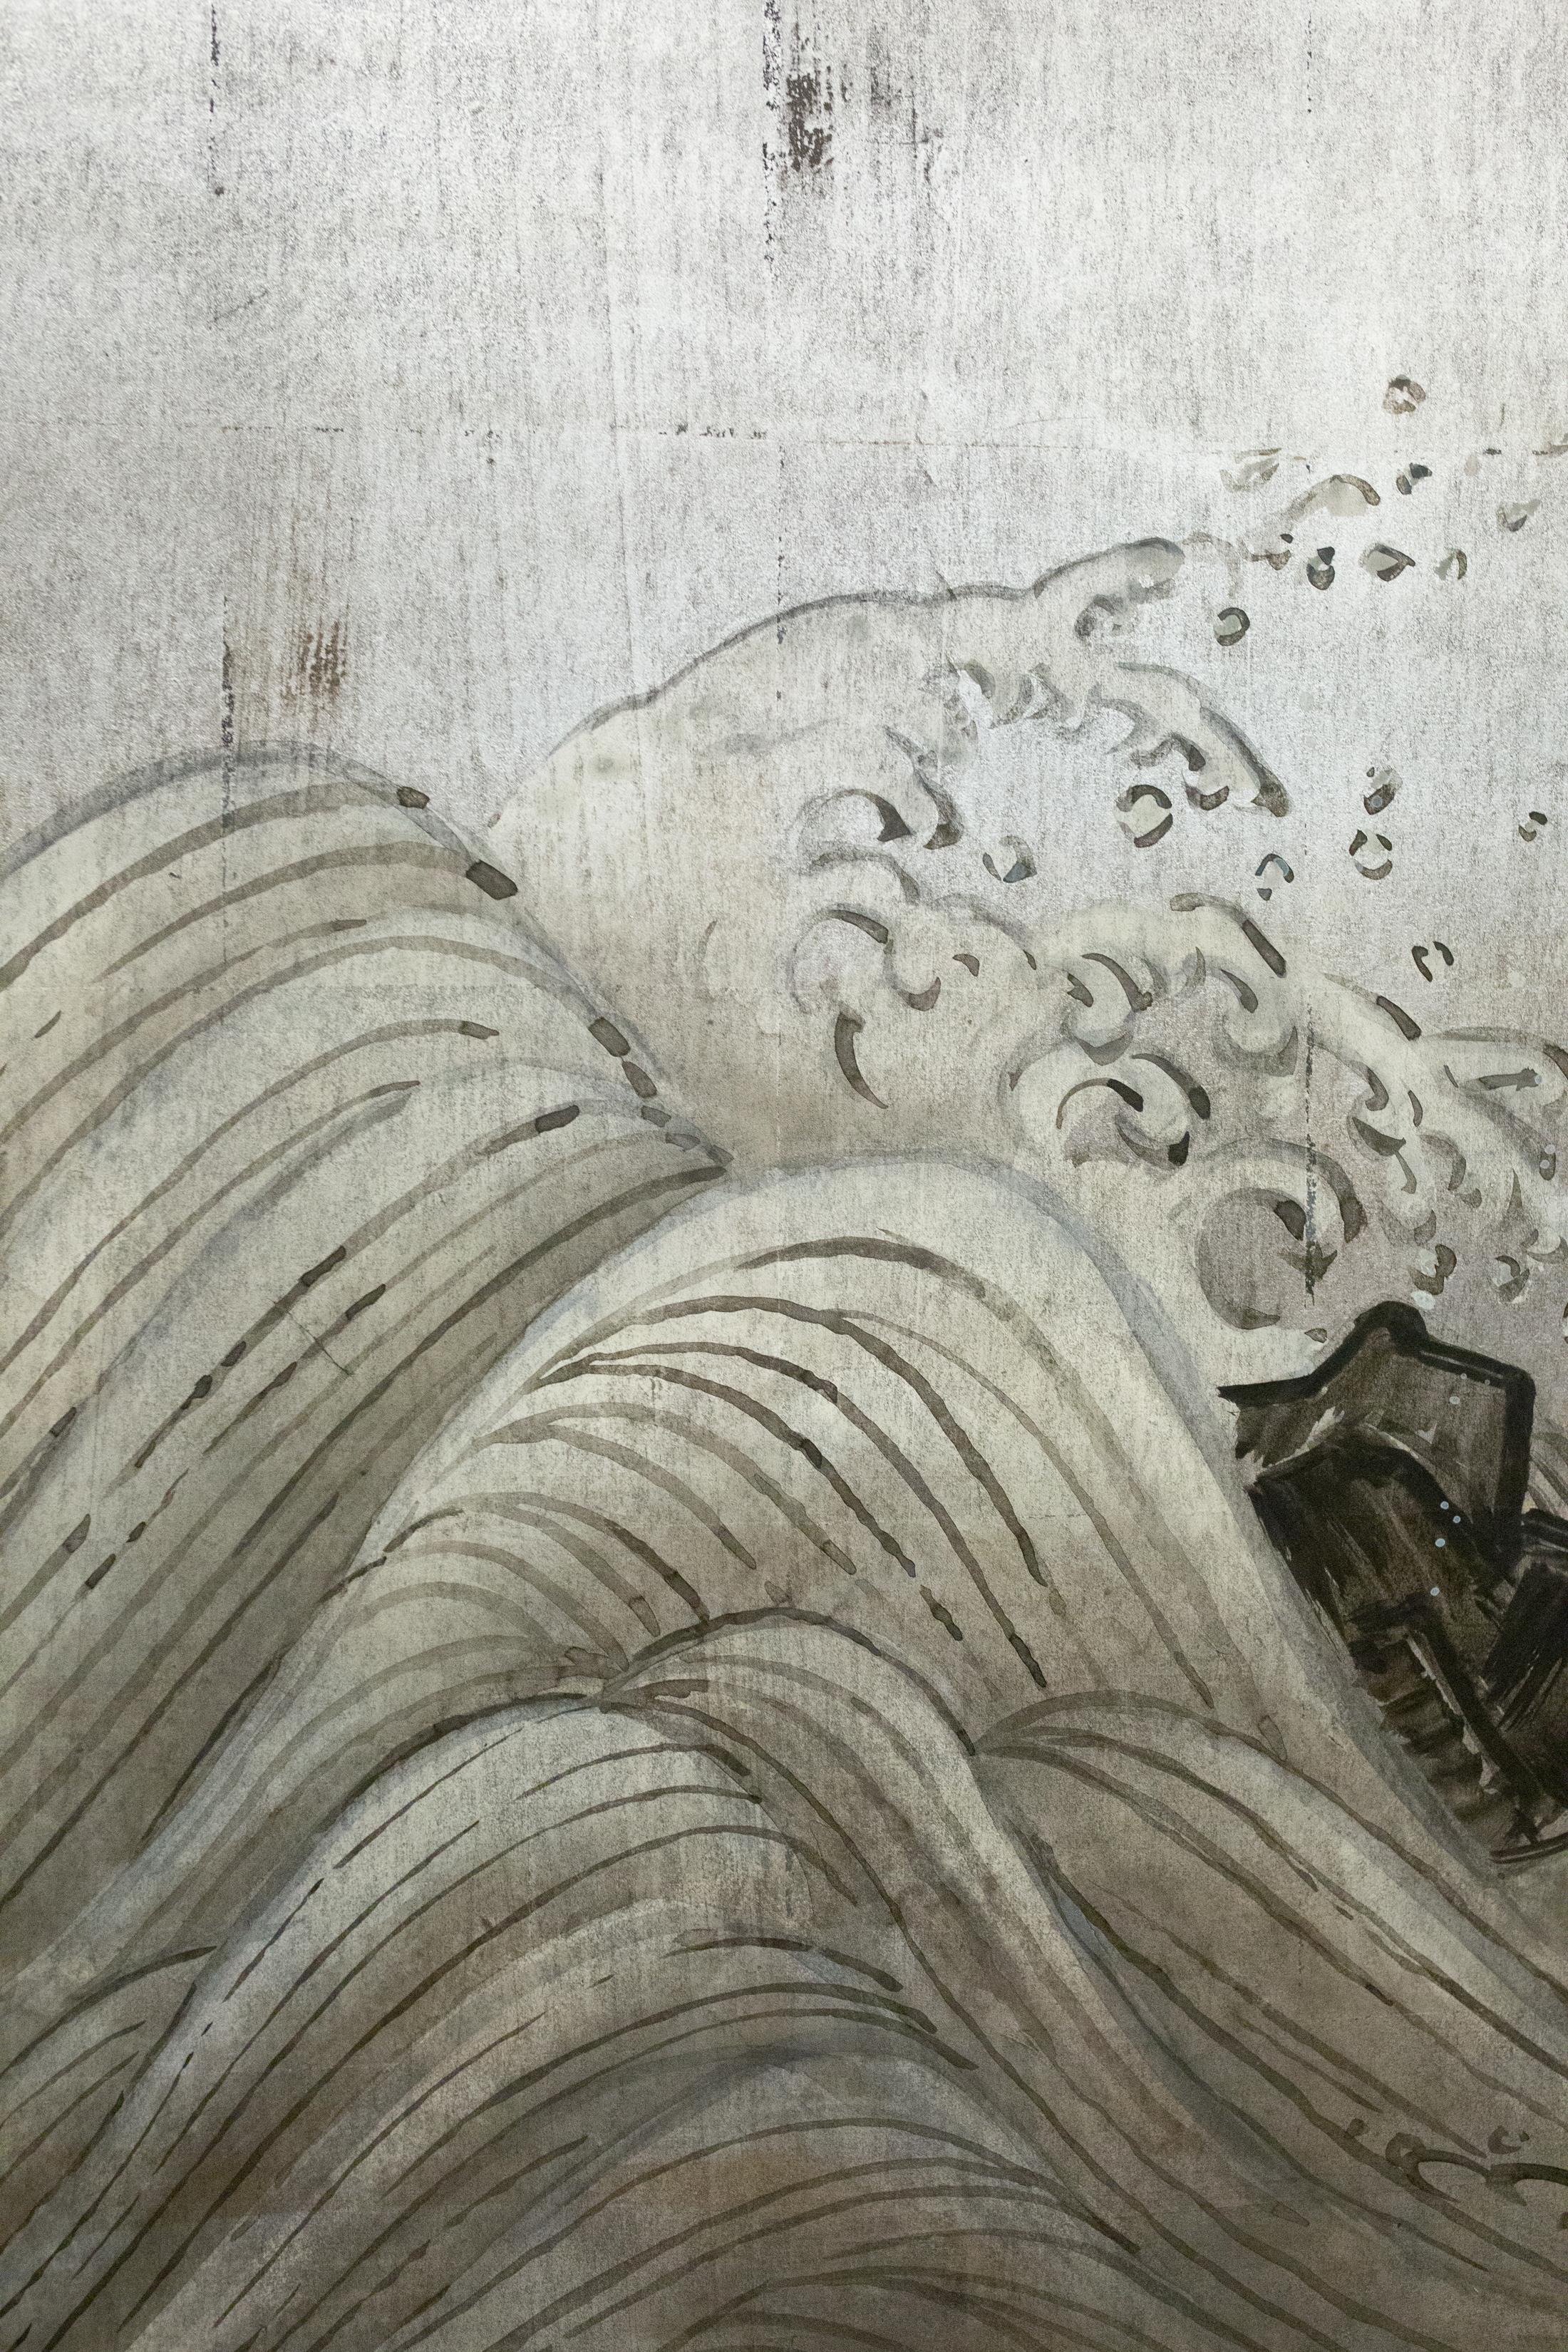 Japanese two-panel screen: Stylized waves on silver leaf and golden sun. Showa period (1926-1989), modern painting in mineral pigments on silver.